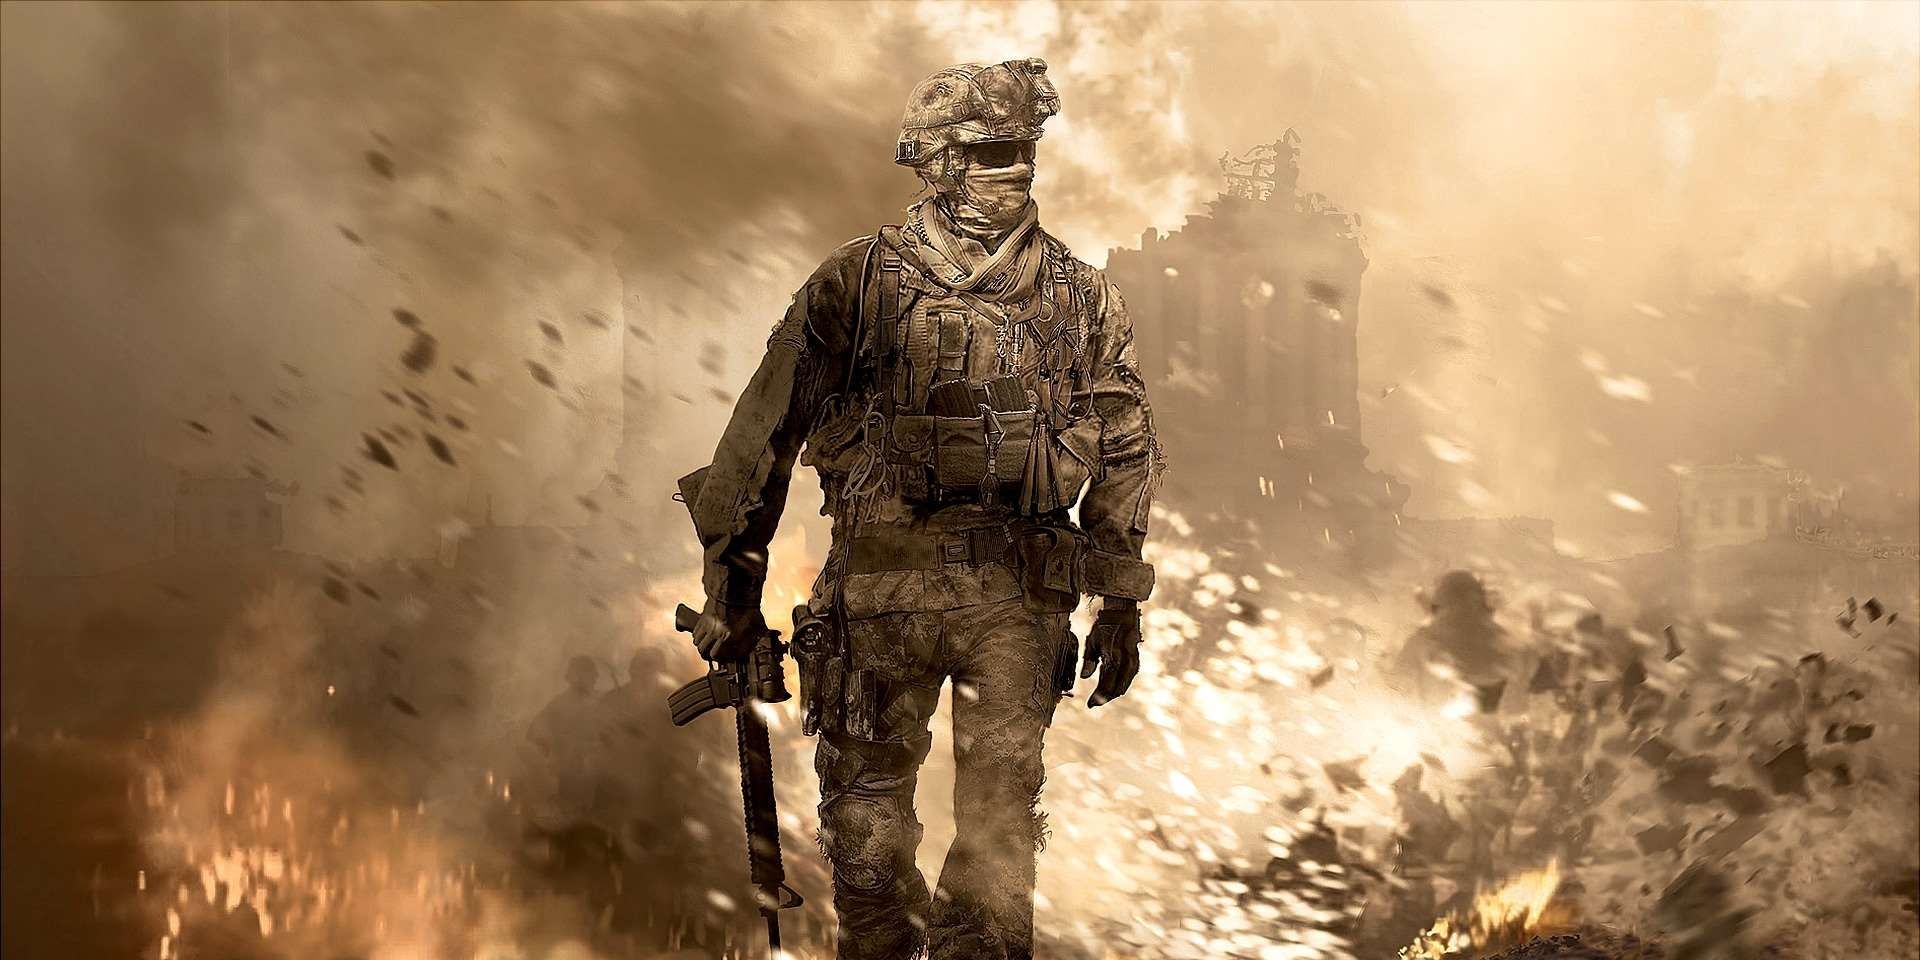 MW2] hello i just made a custom cod mw2 remastered cover art.its my  first draft so plz ignore any photoshop fails.and if anyone wanna  download here it is. : u/_-SIDESWIPE-_